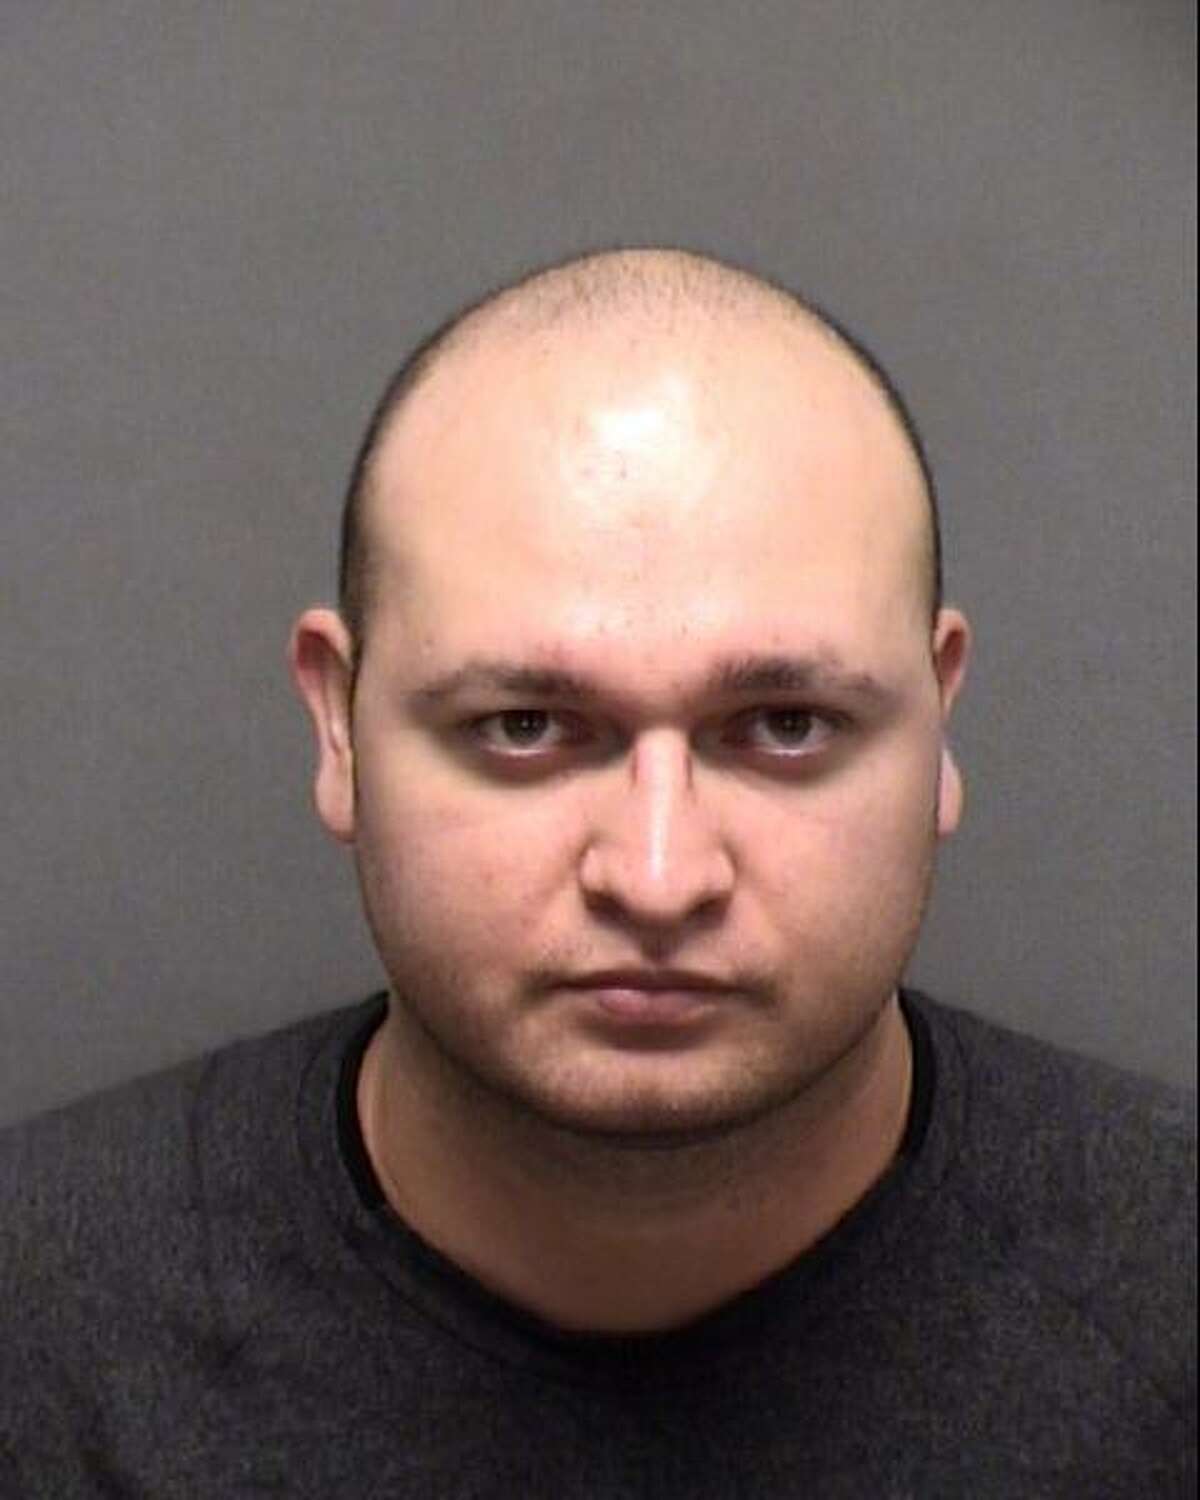 Armando Trevino faces charges related to bribery and smuggling heroin and Suboxone into the Bexar County jail.